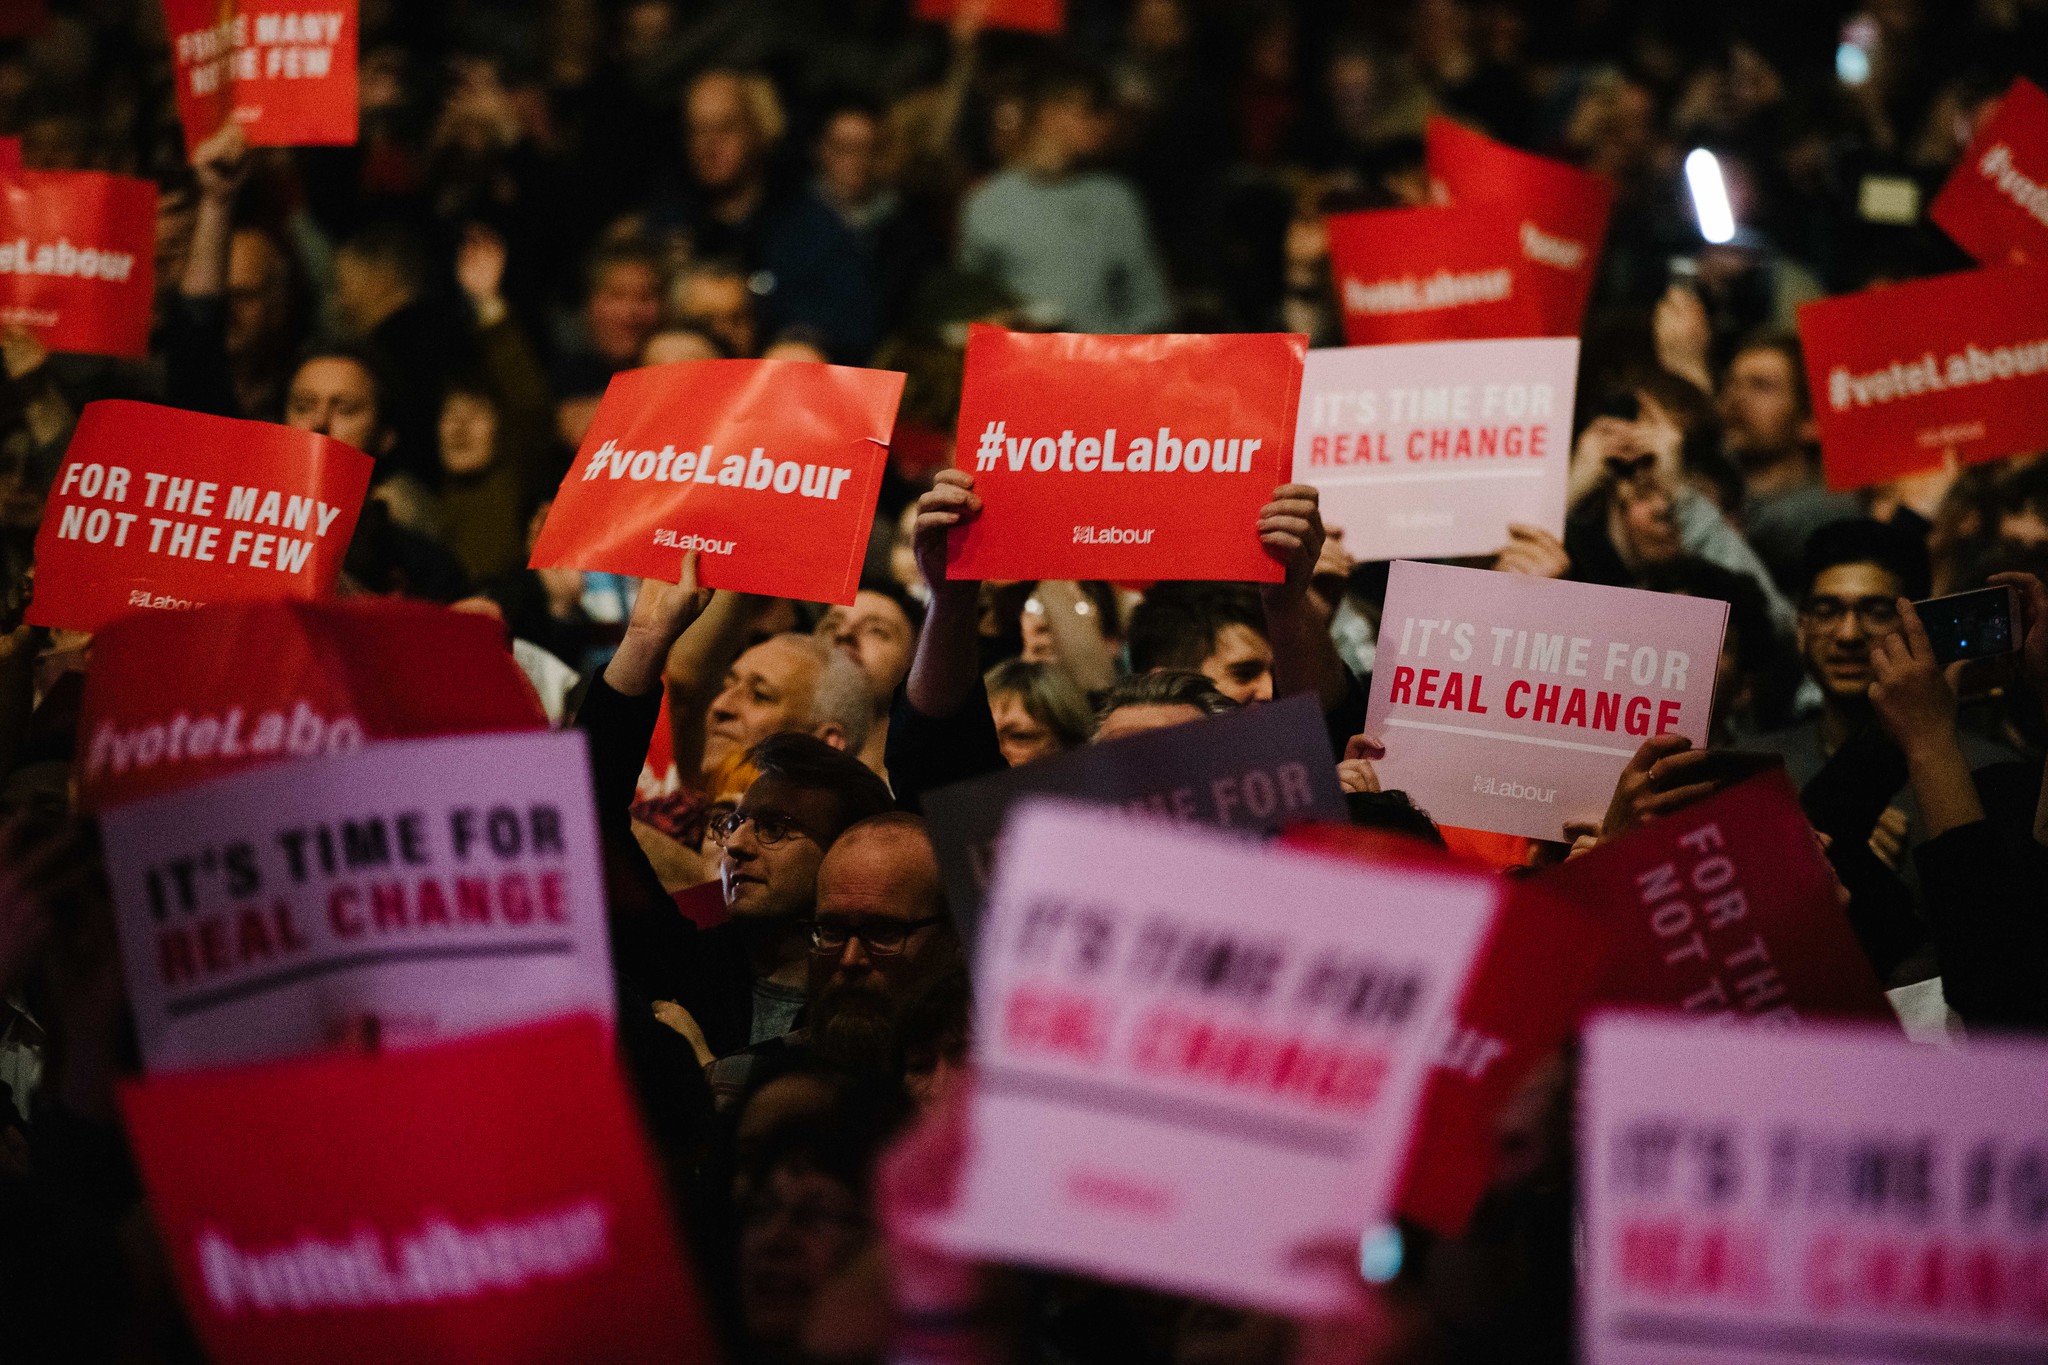 “Be bold”: Trade union leaders issue challenge to Labour leadership